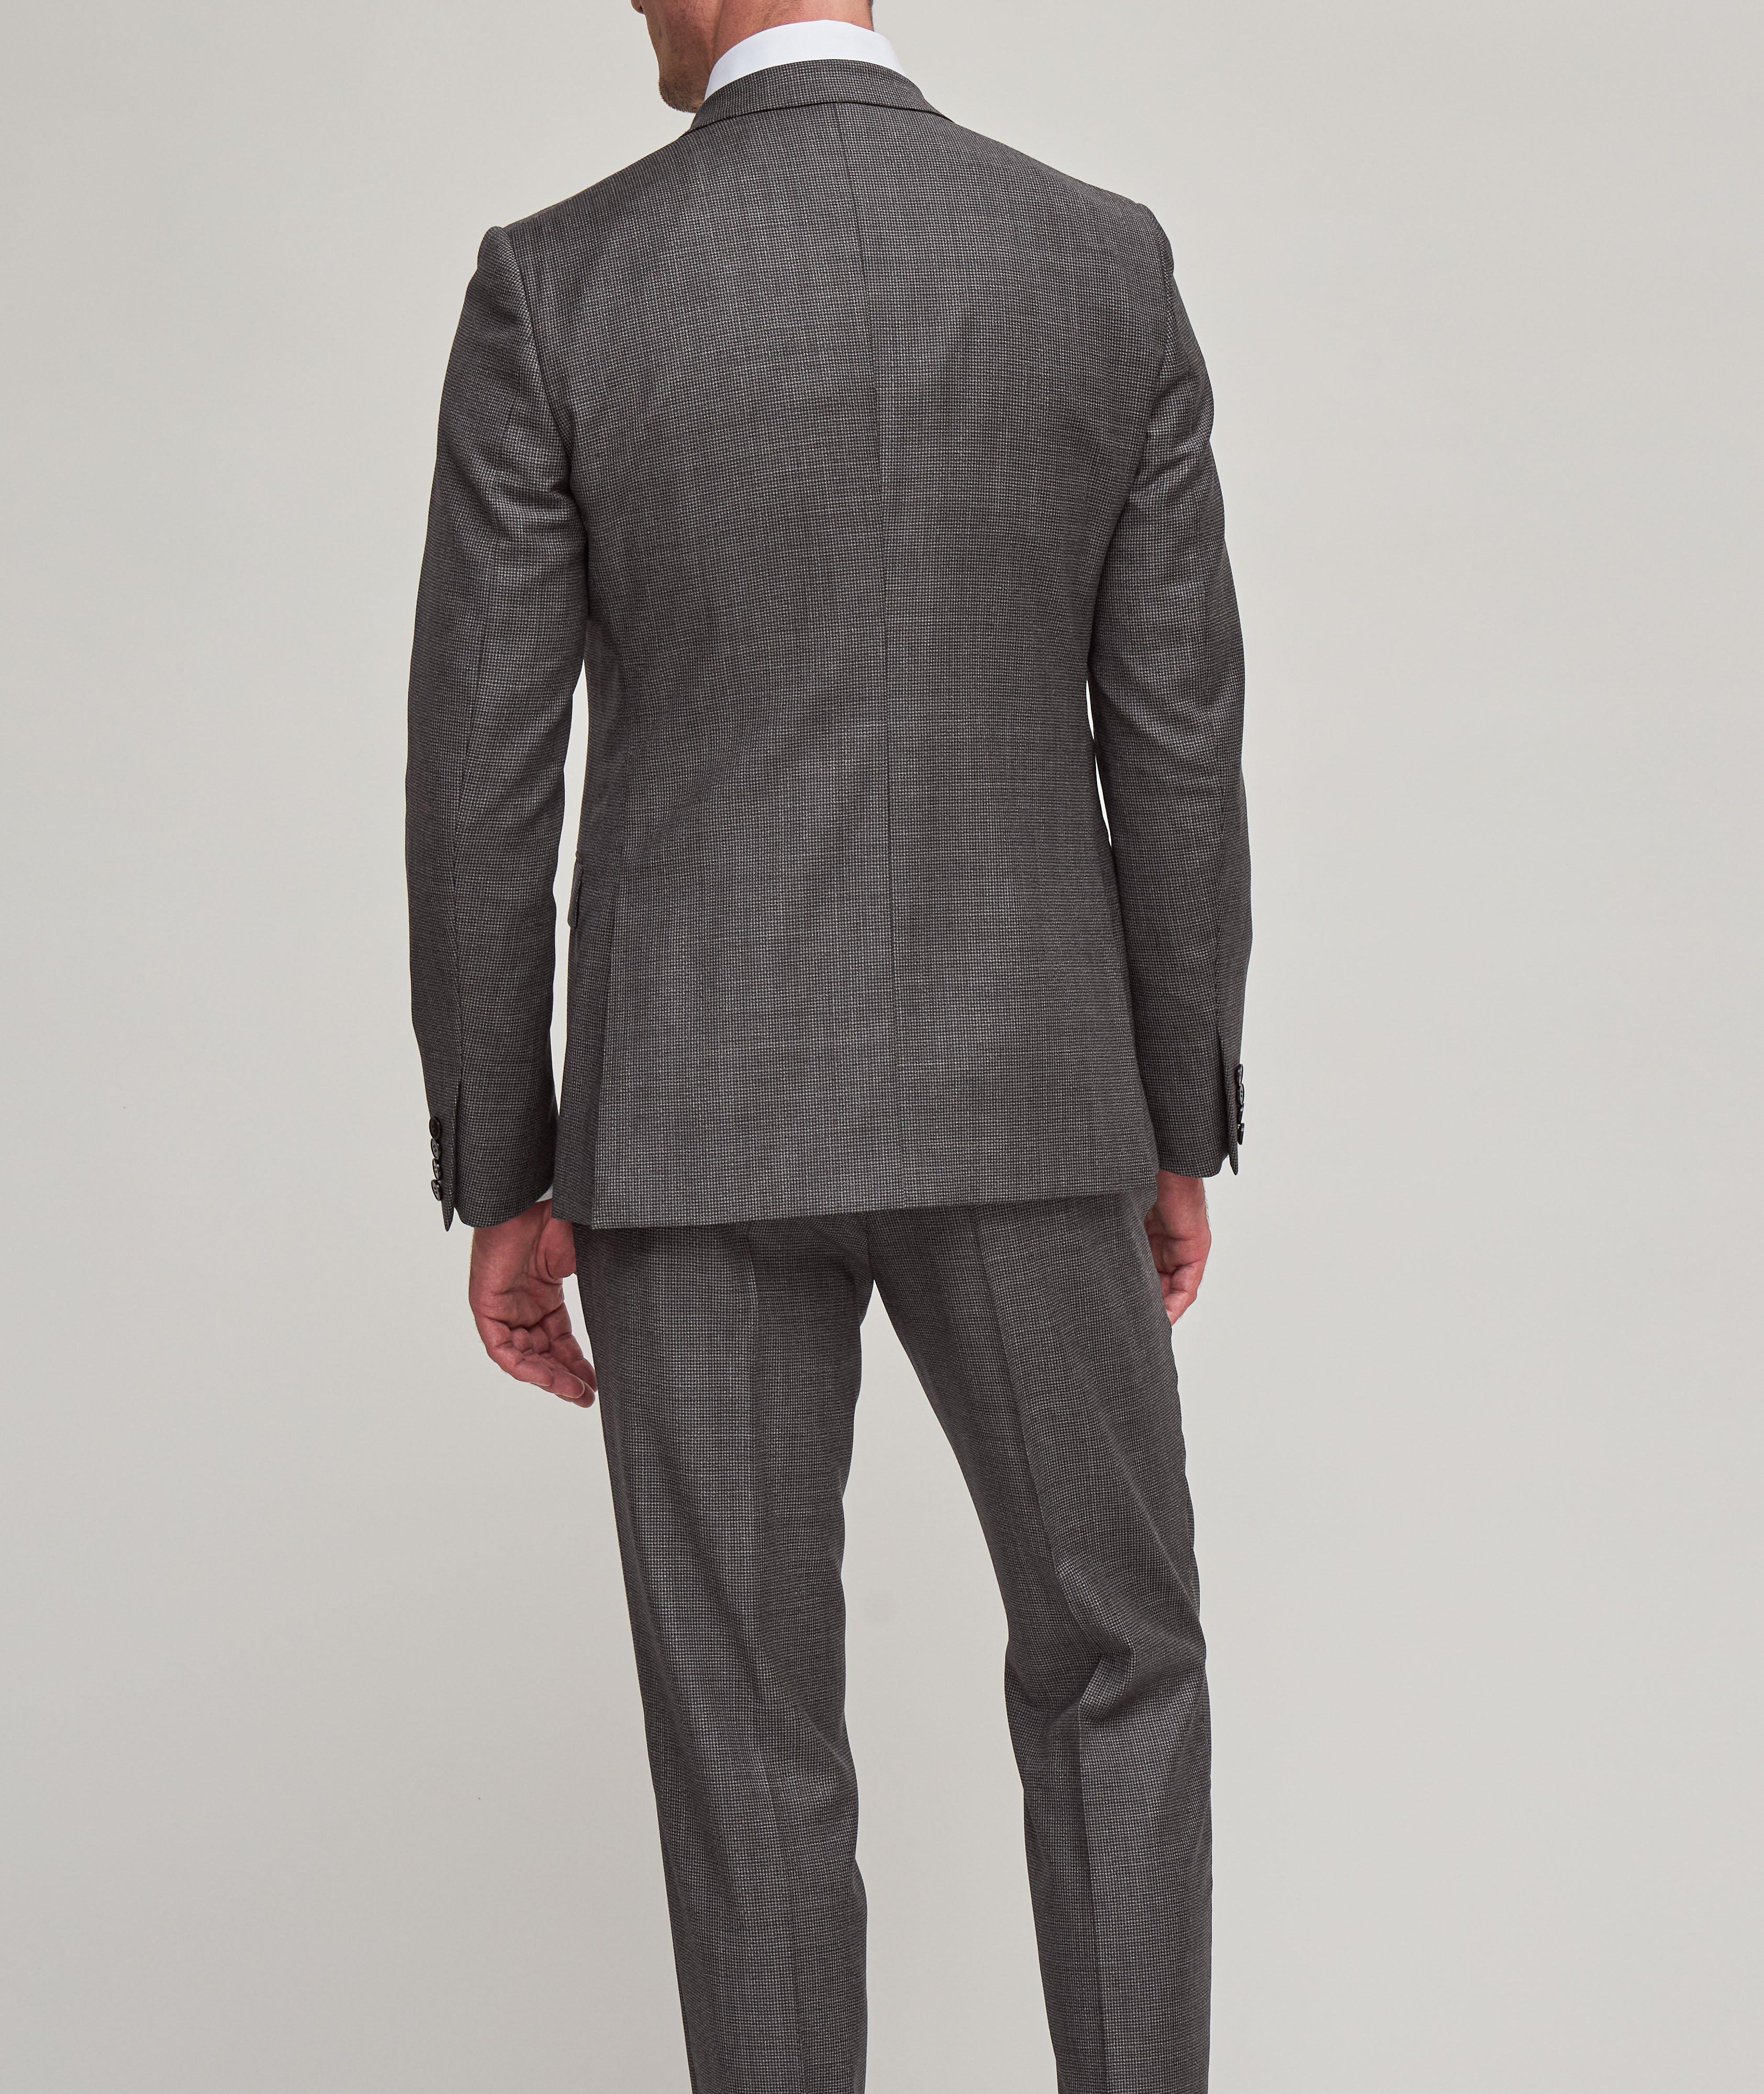 Fitted Multiseason Miniature Houndstooth Pattern Suit image 2